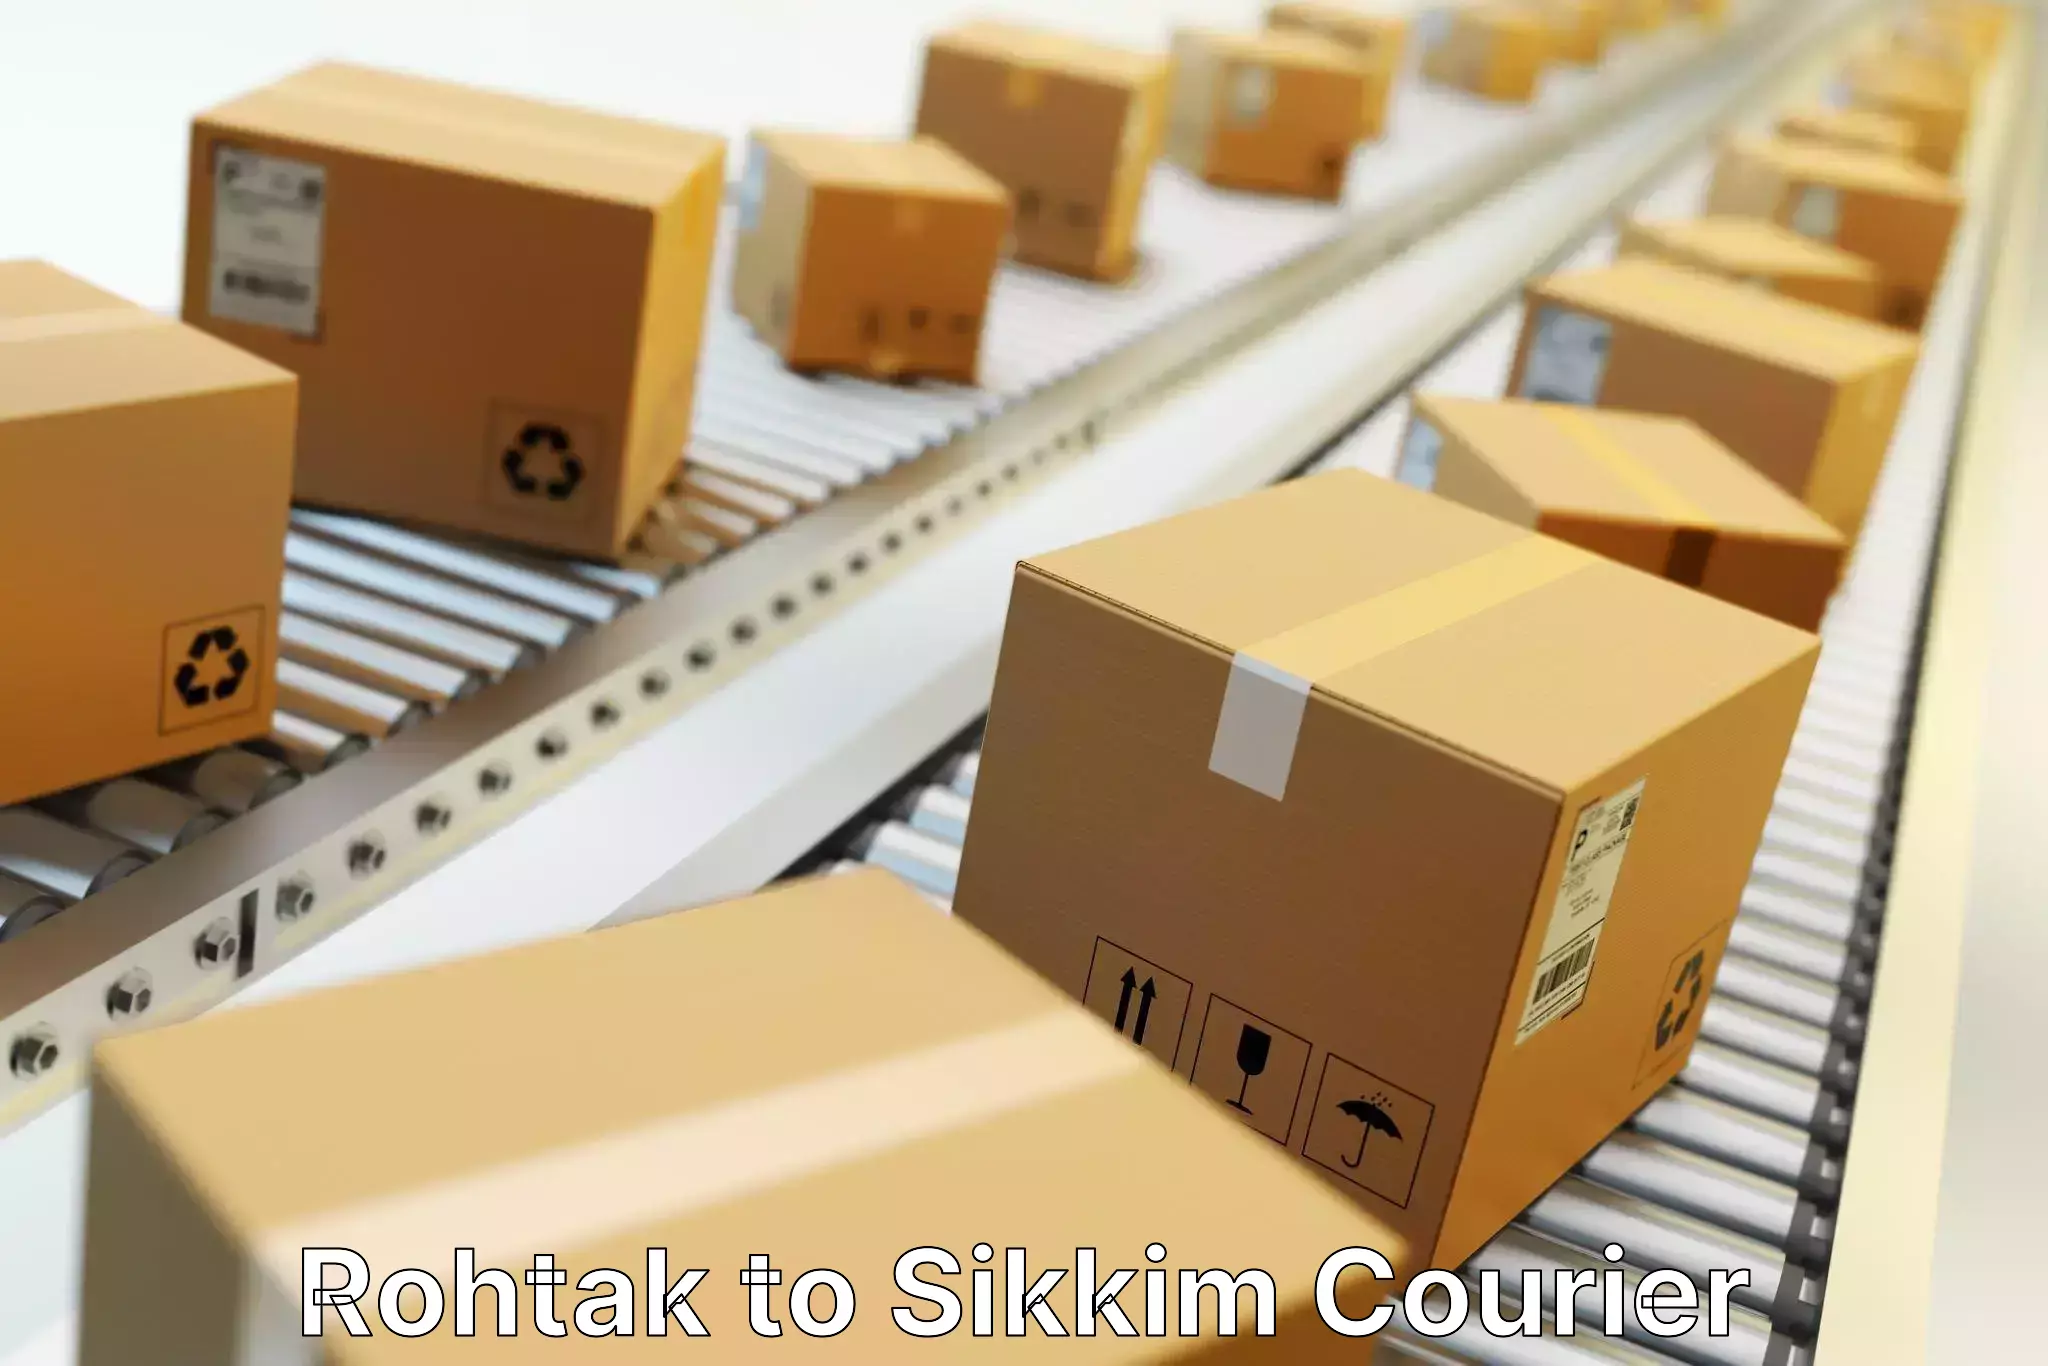 Global logistics network Rohtak to South Sikkim